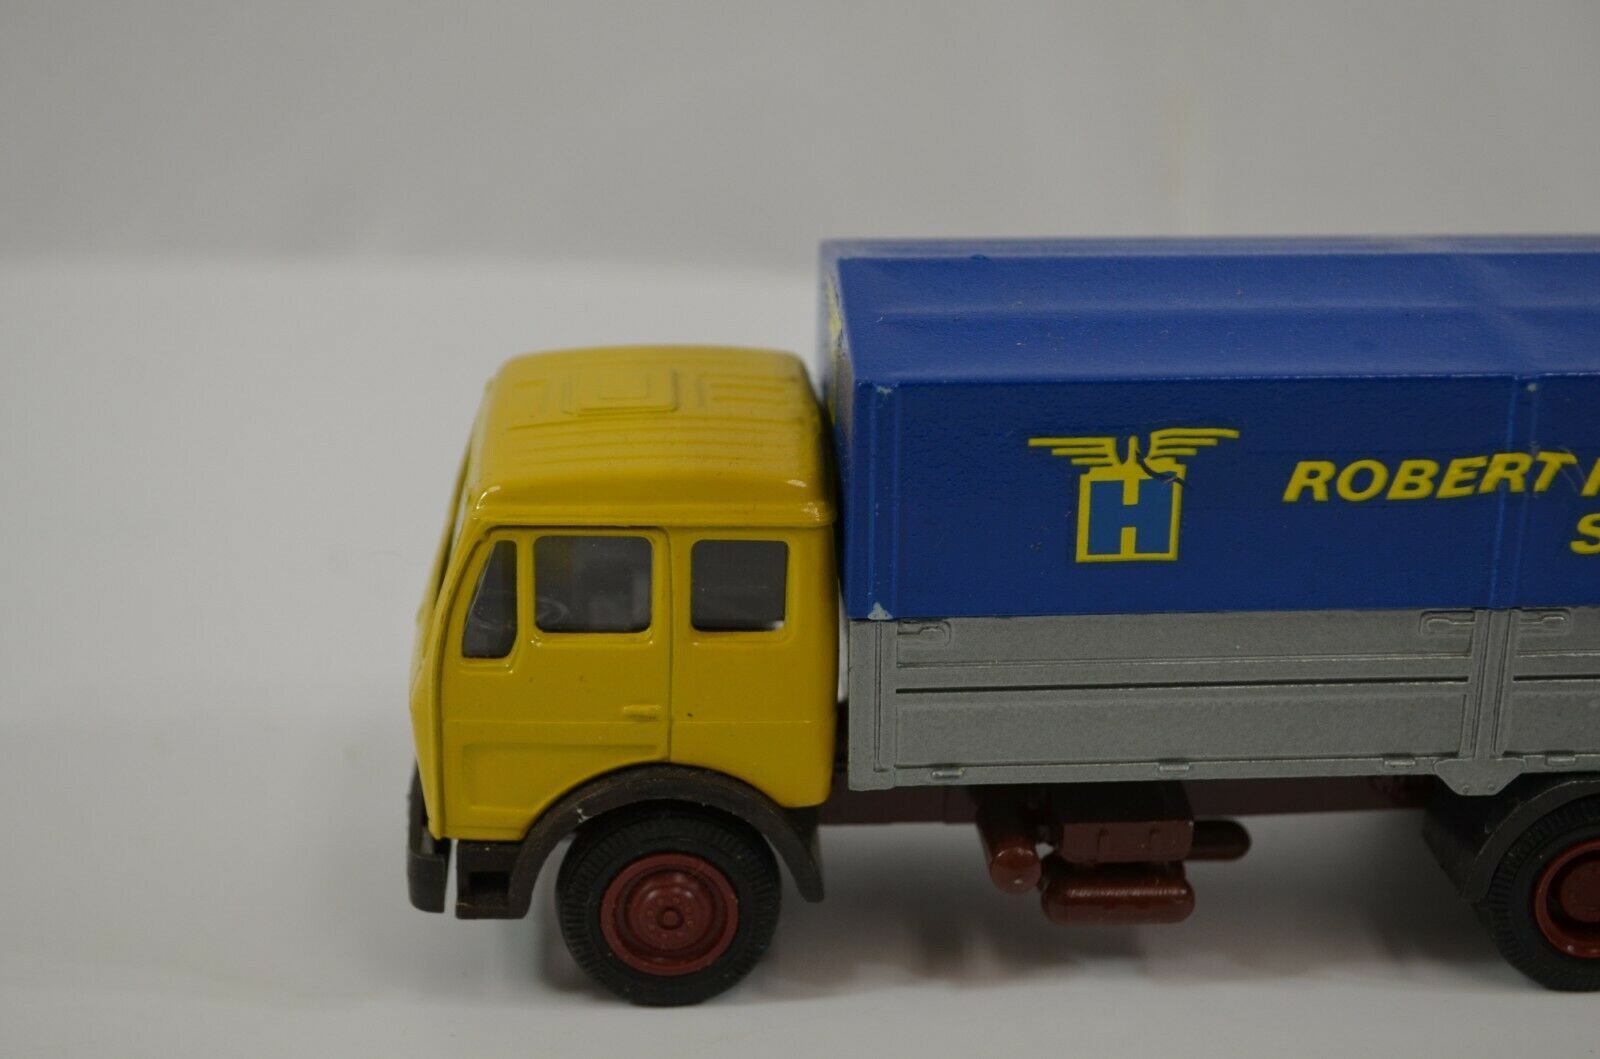 Primary image for NZG Mercedes Benz Heilmann Spedition Articulated Truck Lorry Germany 1/50 Scale